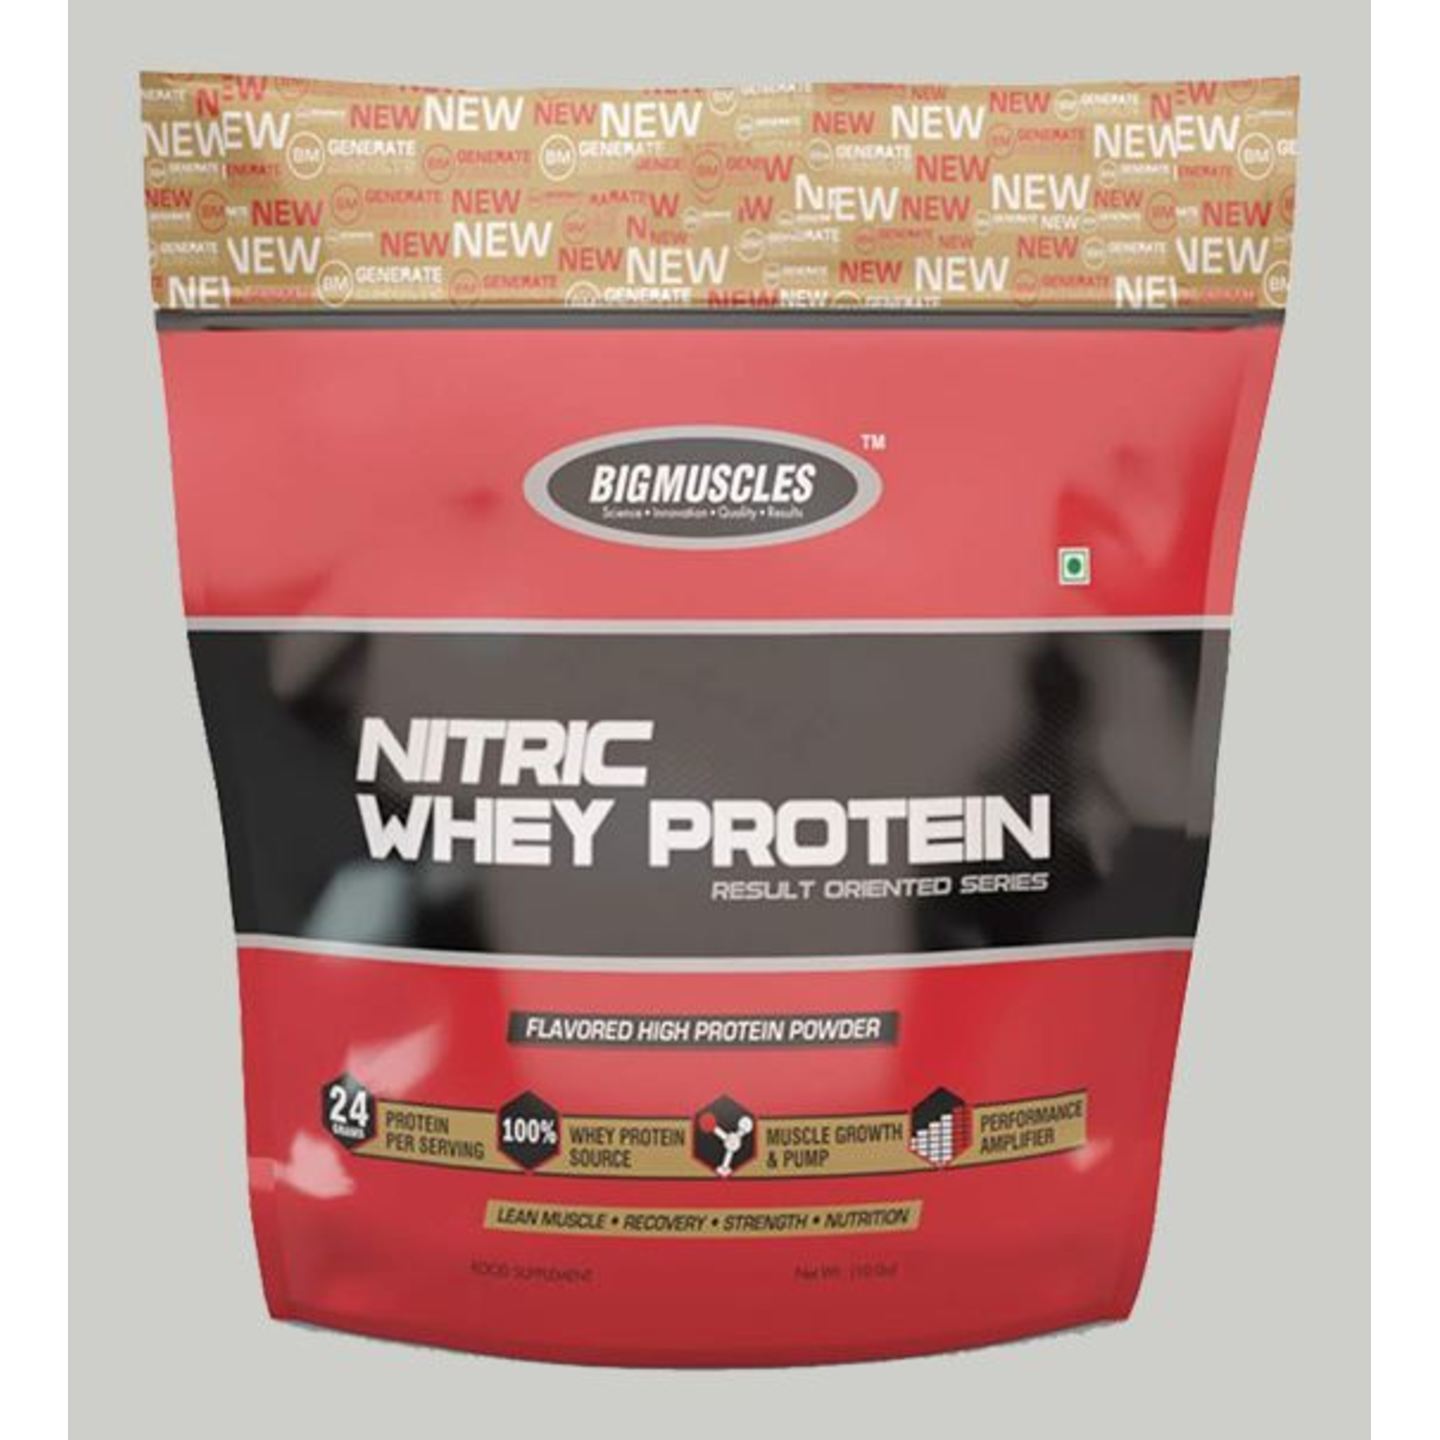 MastMart Bigmuscles Nutrition Nitric Whey Protein Cafe Latte 10 lbs